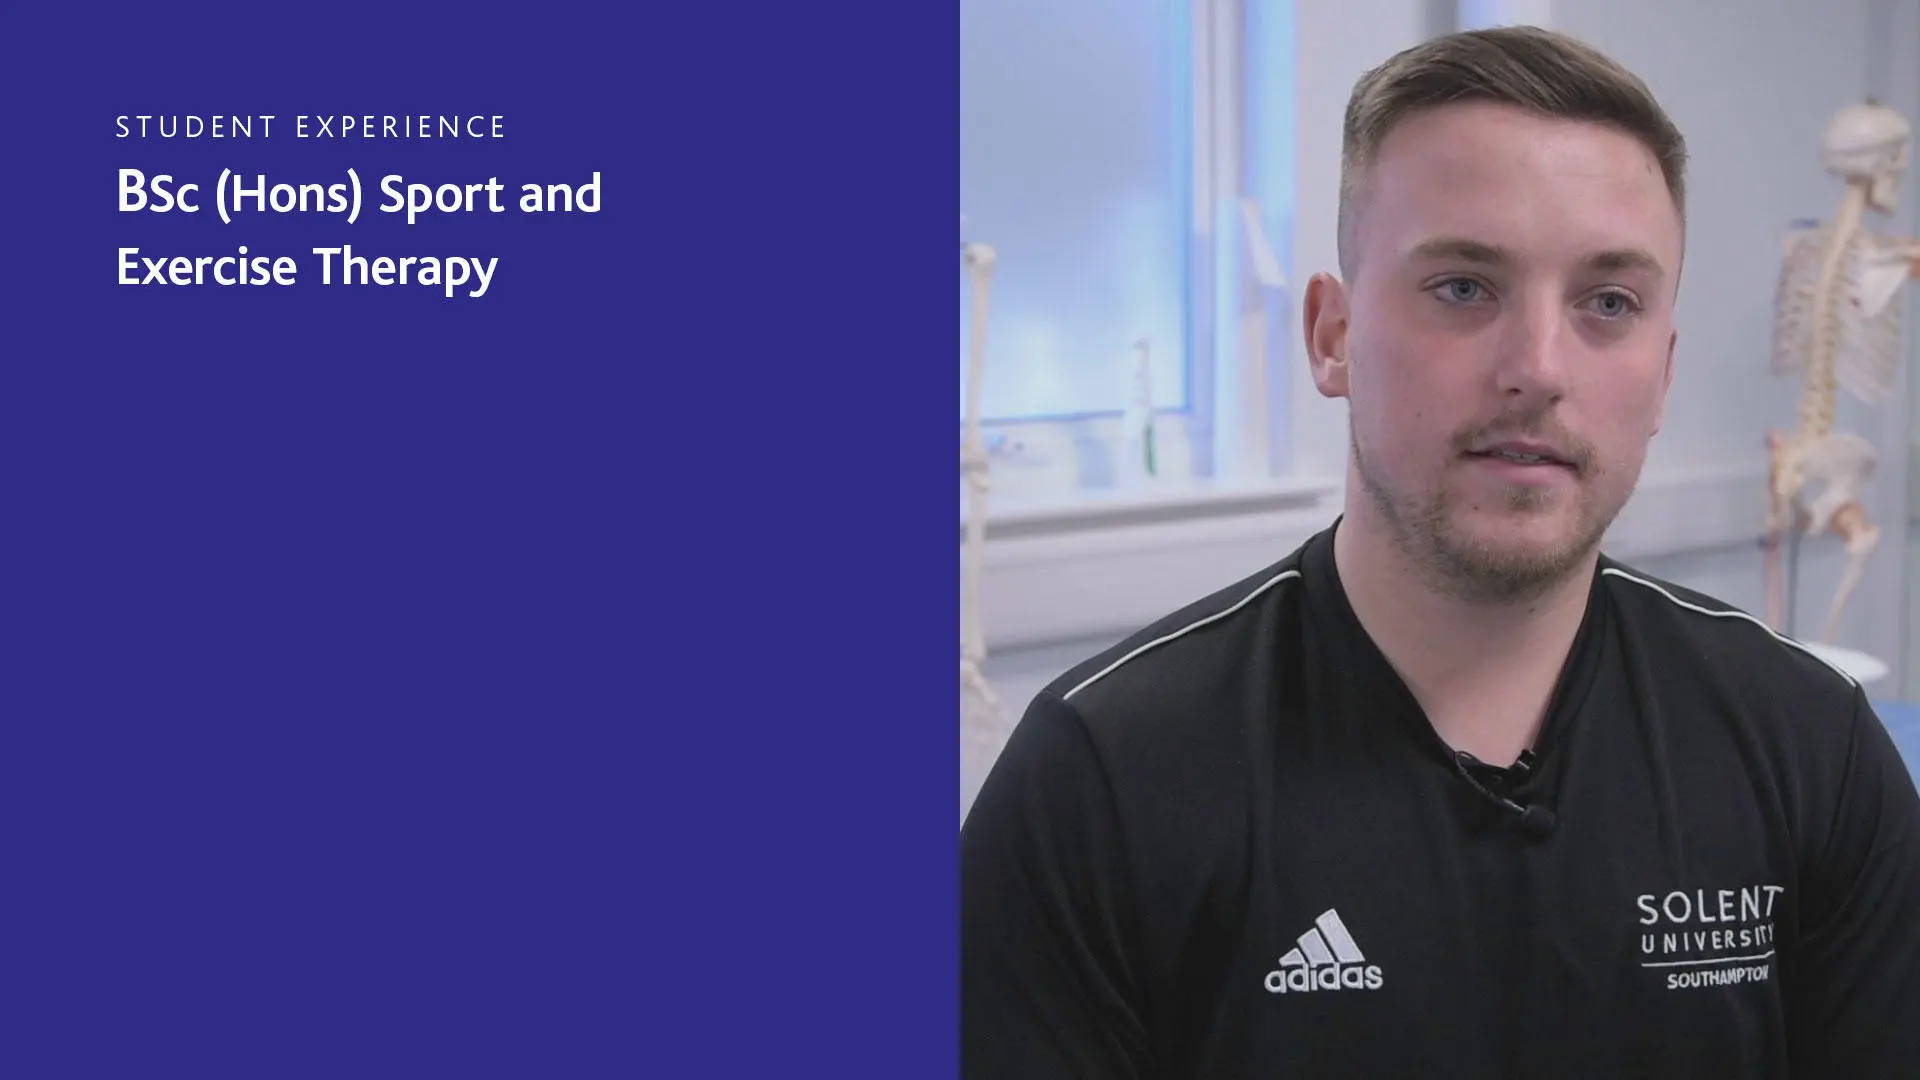 On the left of the screen is a blue rectangle (portrait) with white text over the top that reads 'Student Experience, BSc (Hons) Sport and Exercise Therapy'. To the right is a photo of a student.